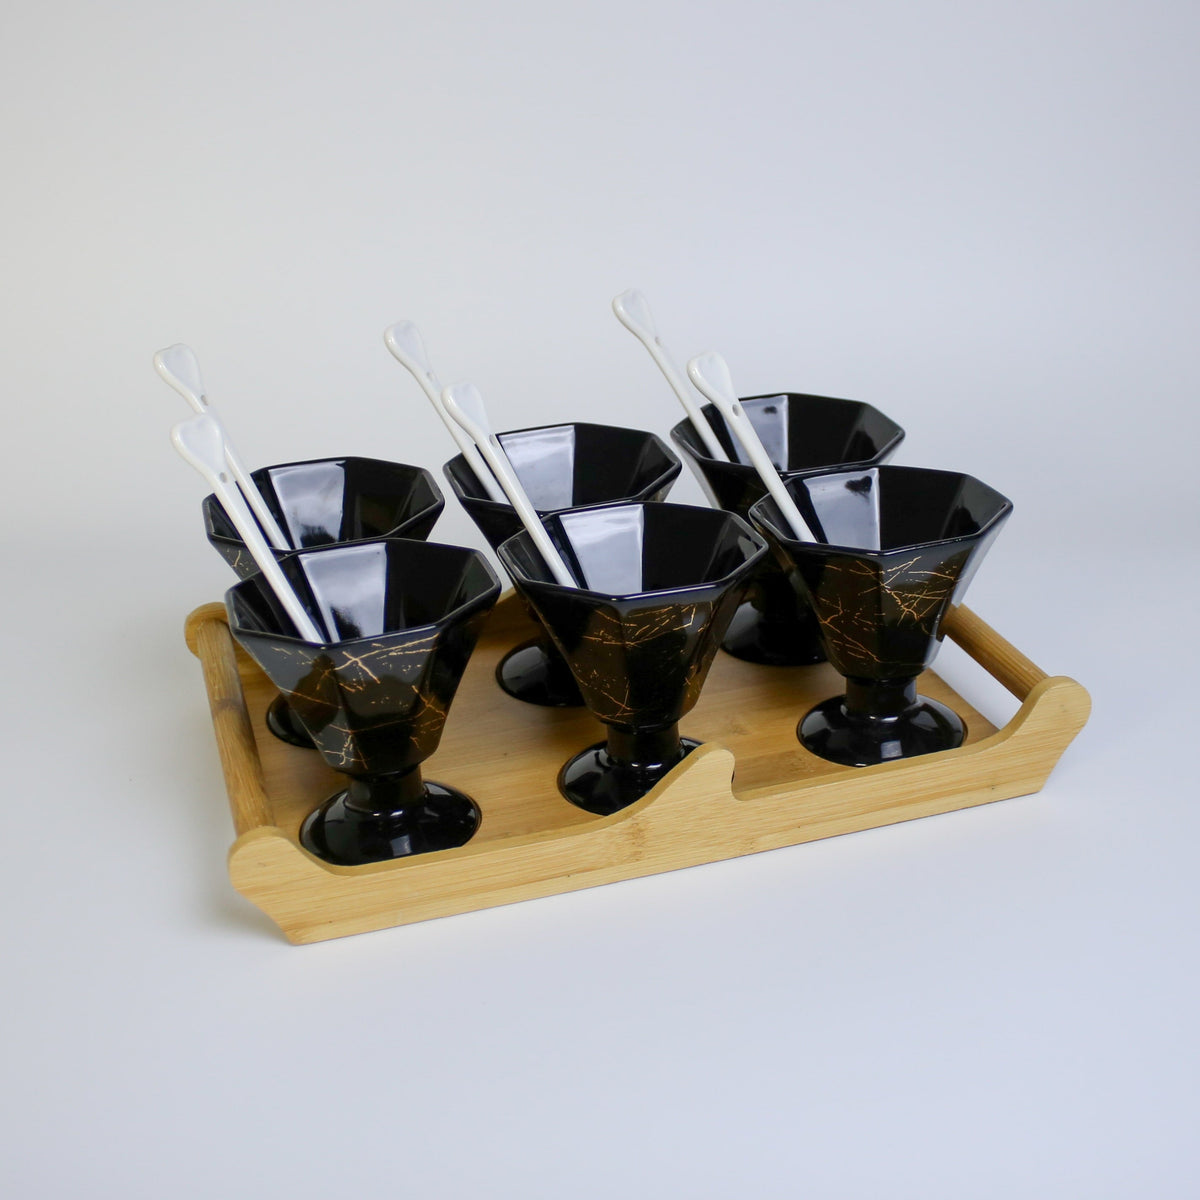 Ceramic Ice Cream Cup 13 Pcs sets with tray